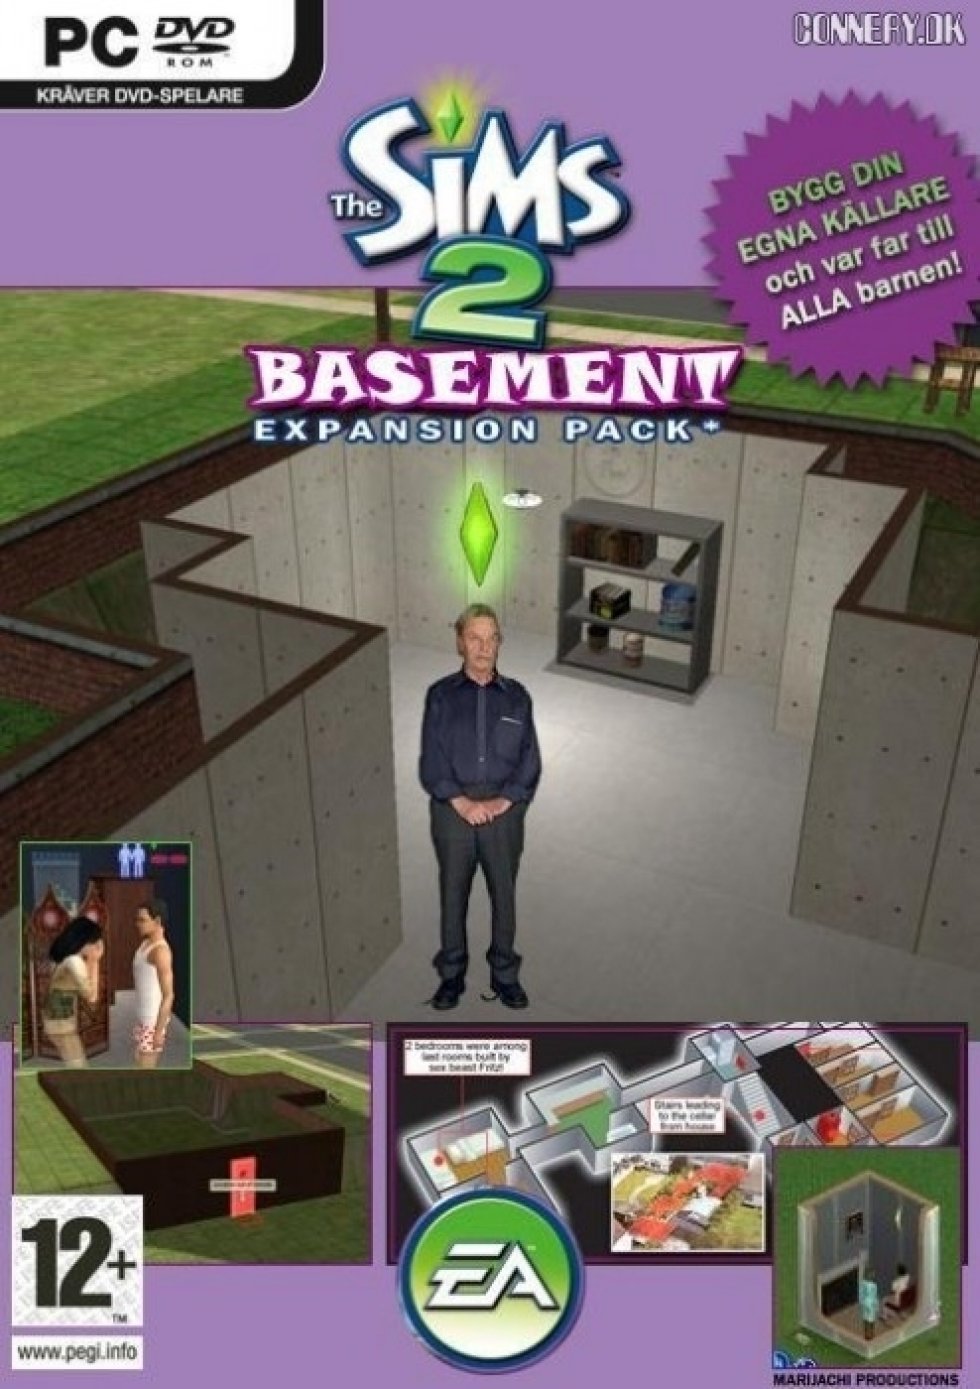 The Sims basement pack